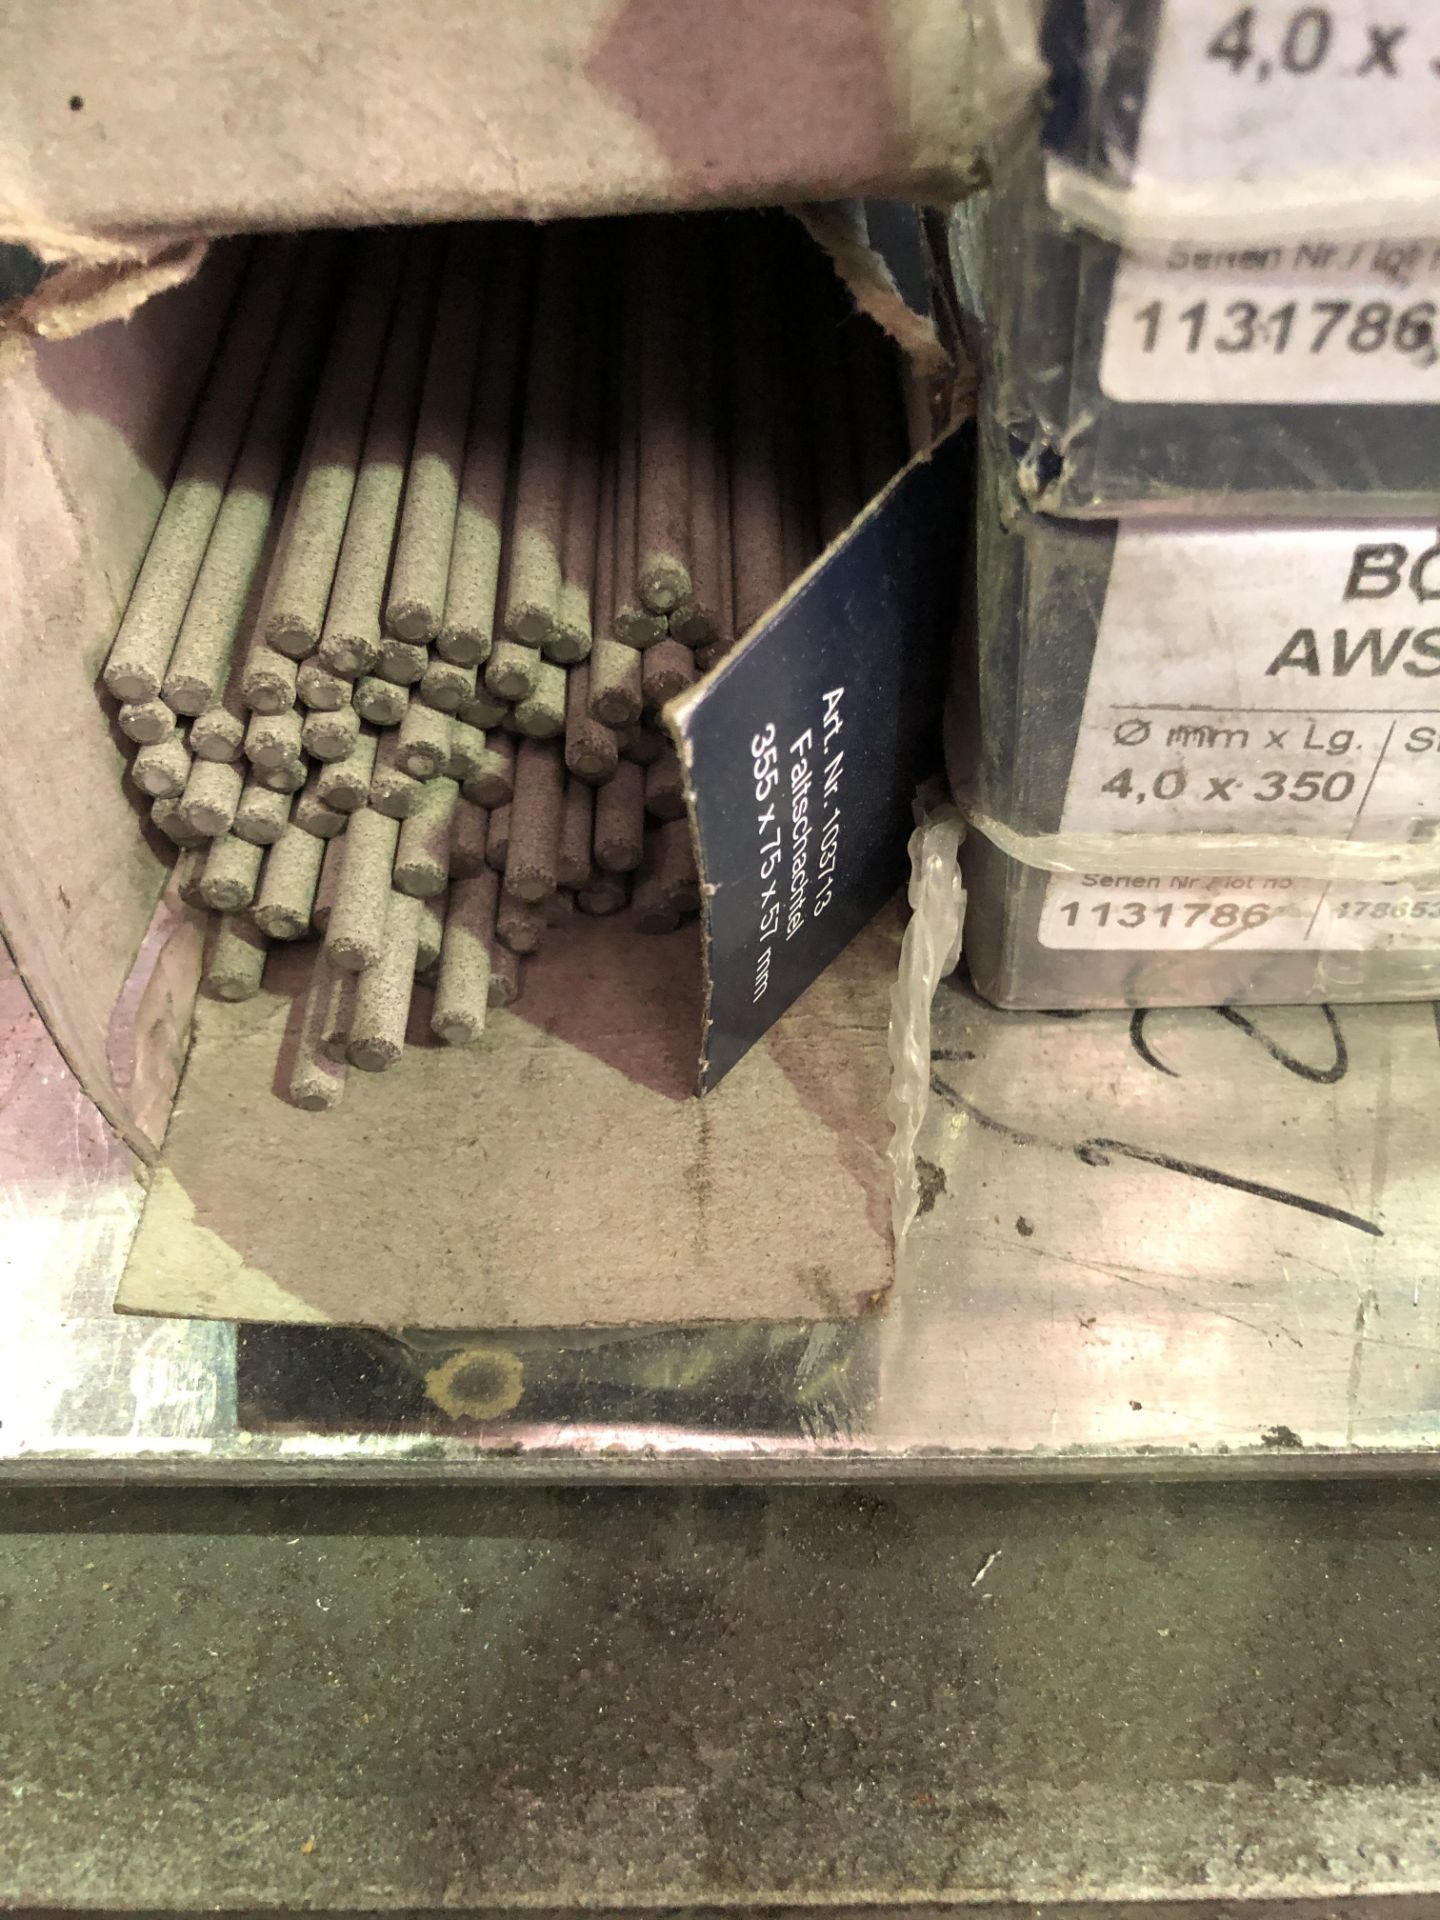 Approx 10: AWSE316L Welding Rod Packs (Please note: Collection by appointment Wednesday 27th or - Image 8 of 11